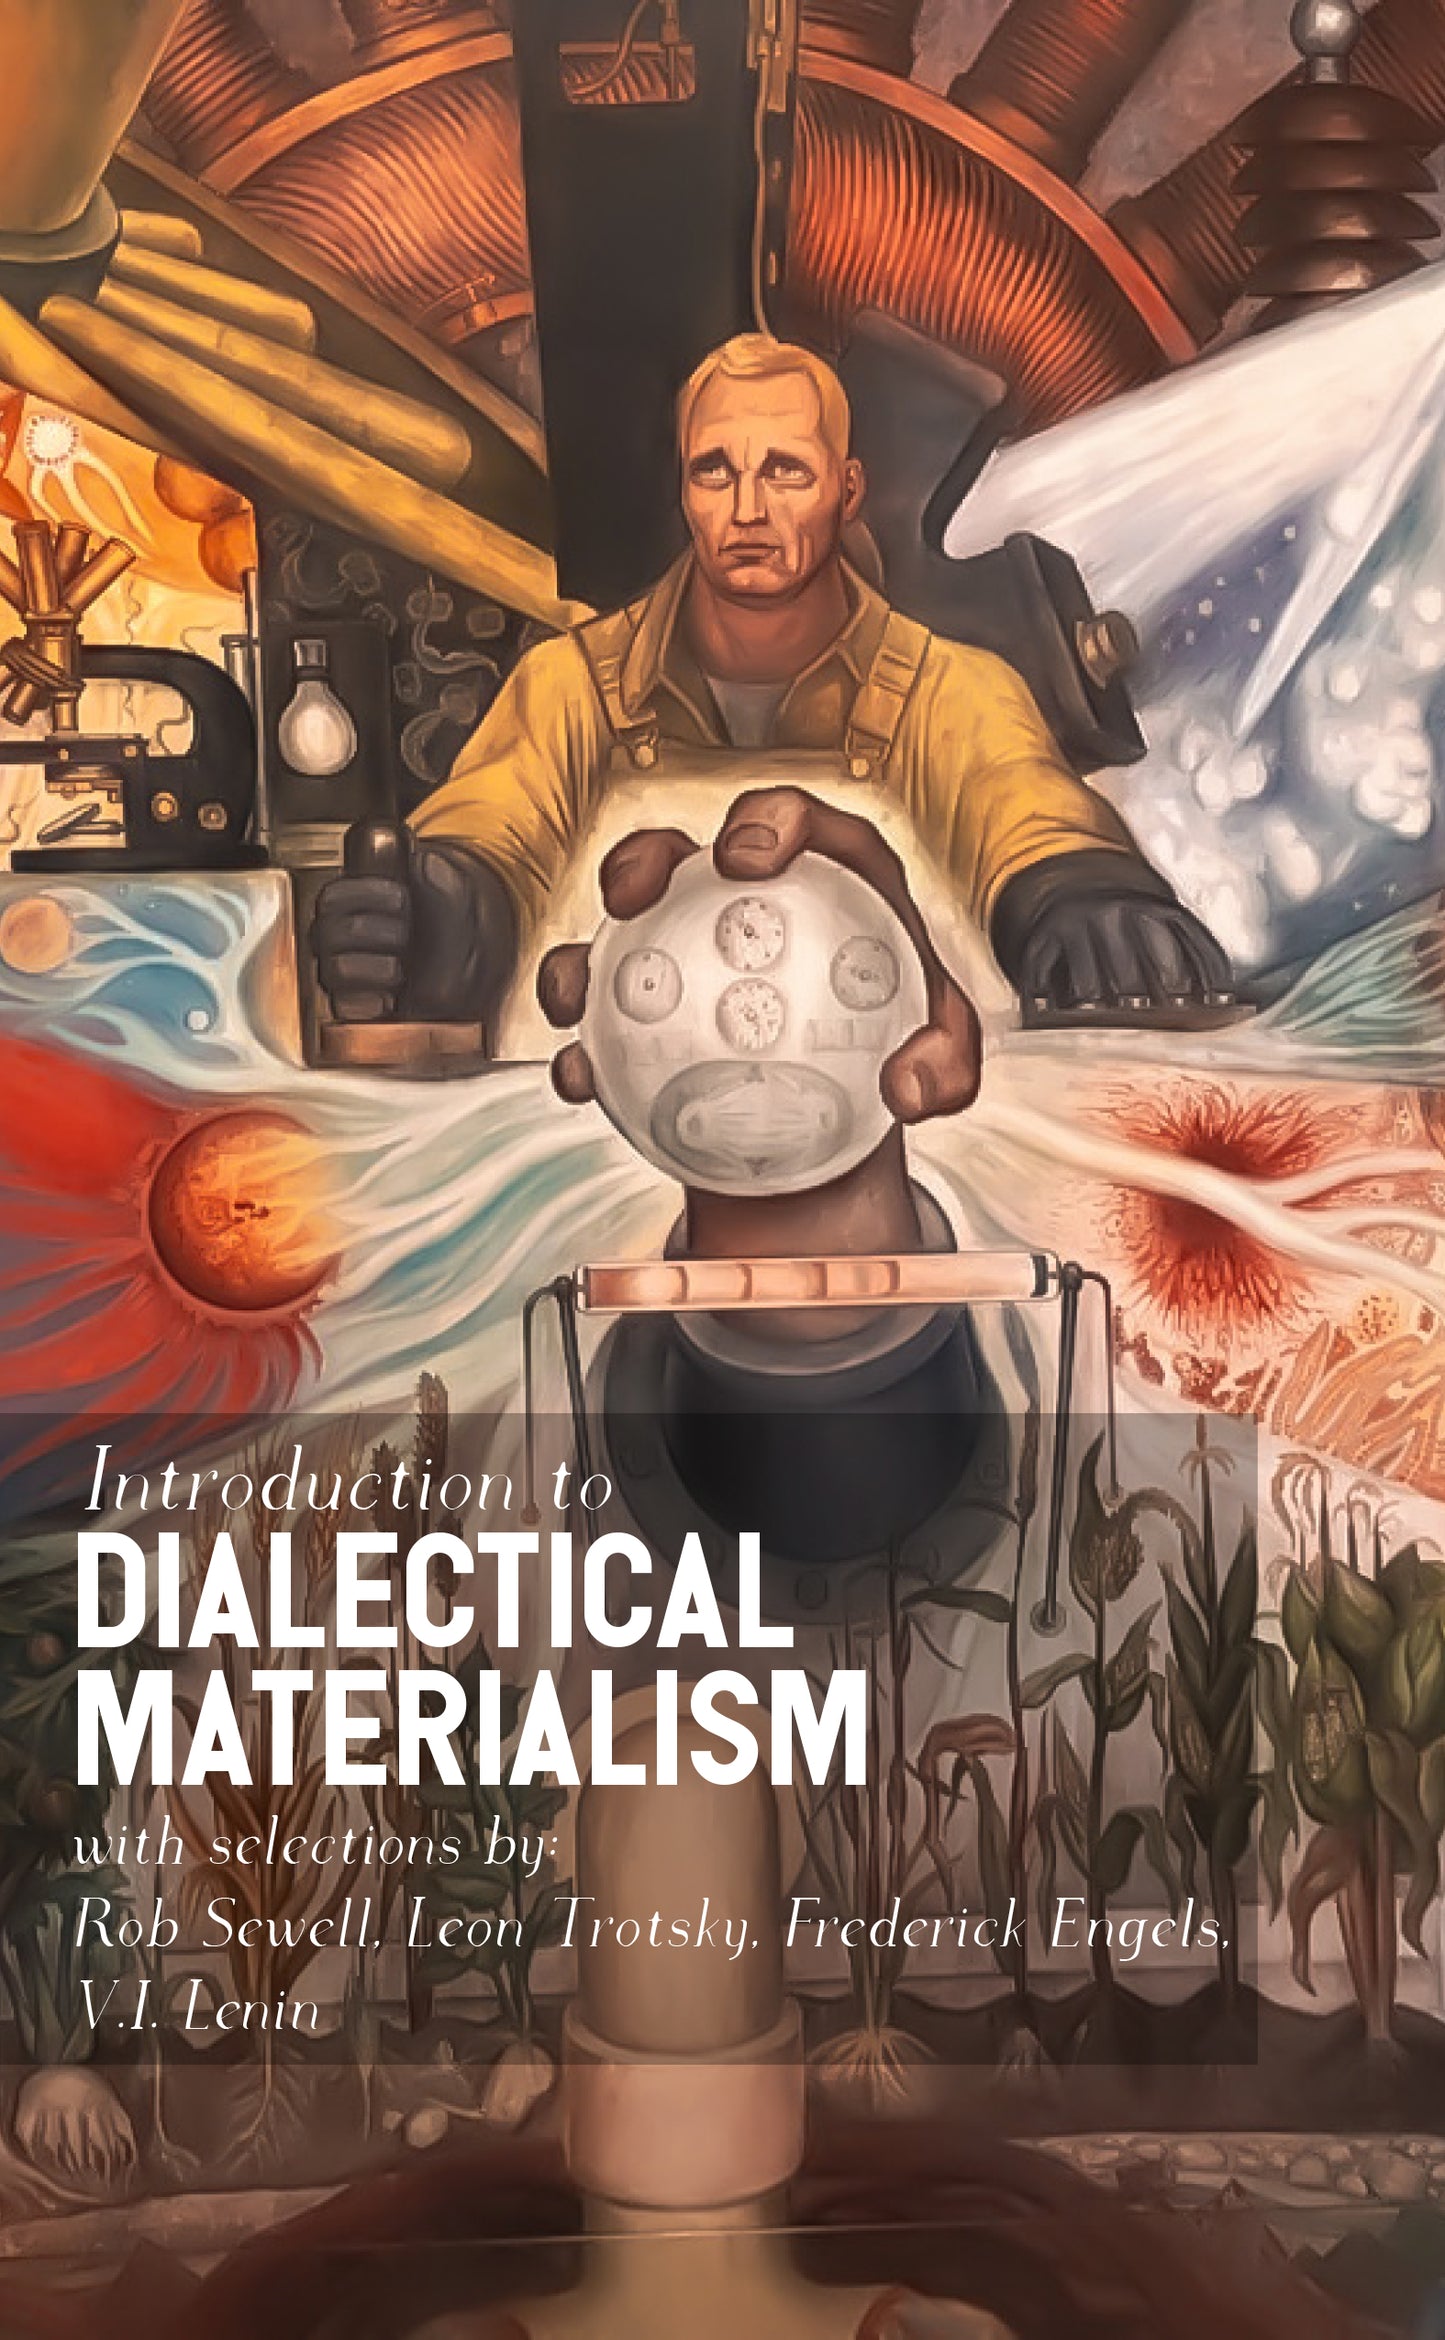 Introduction to Dialectical Materialism